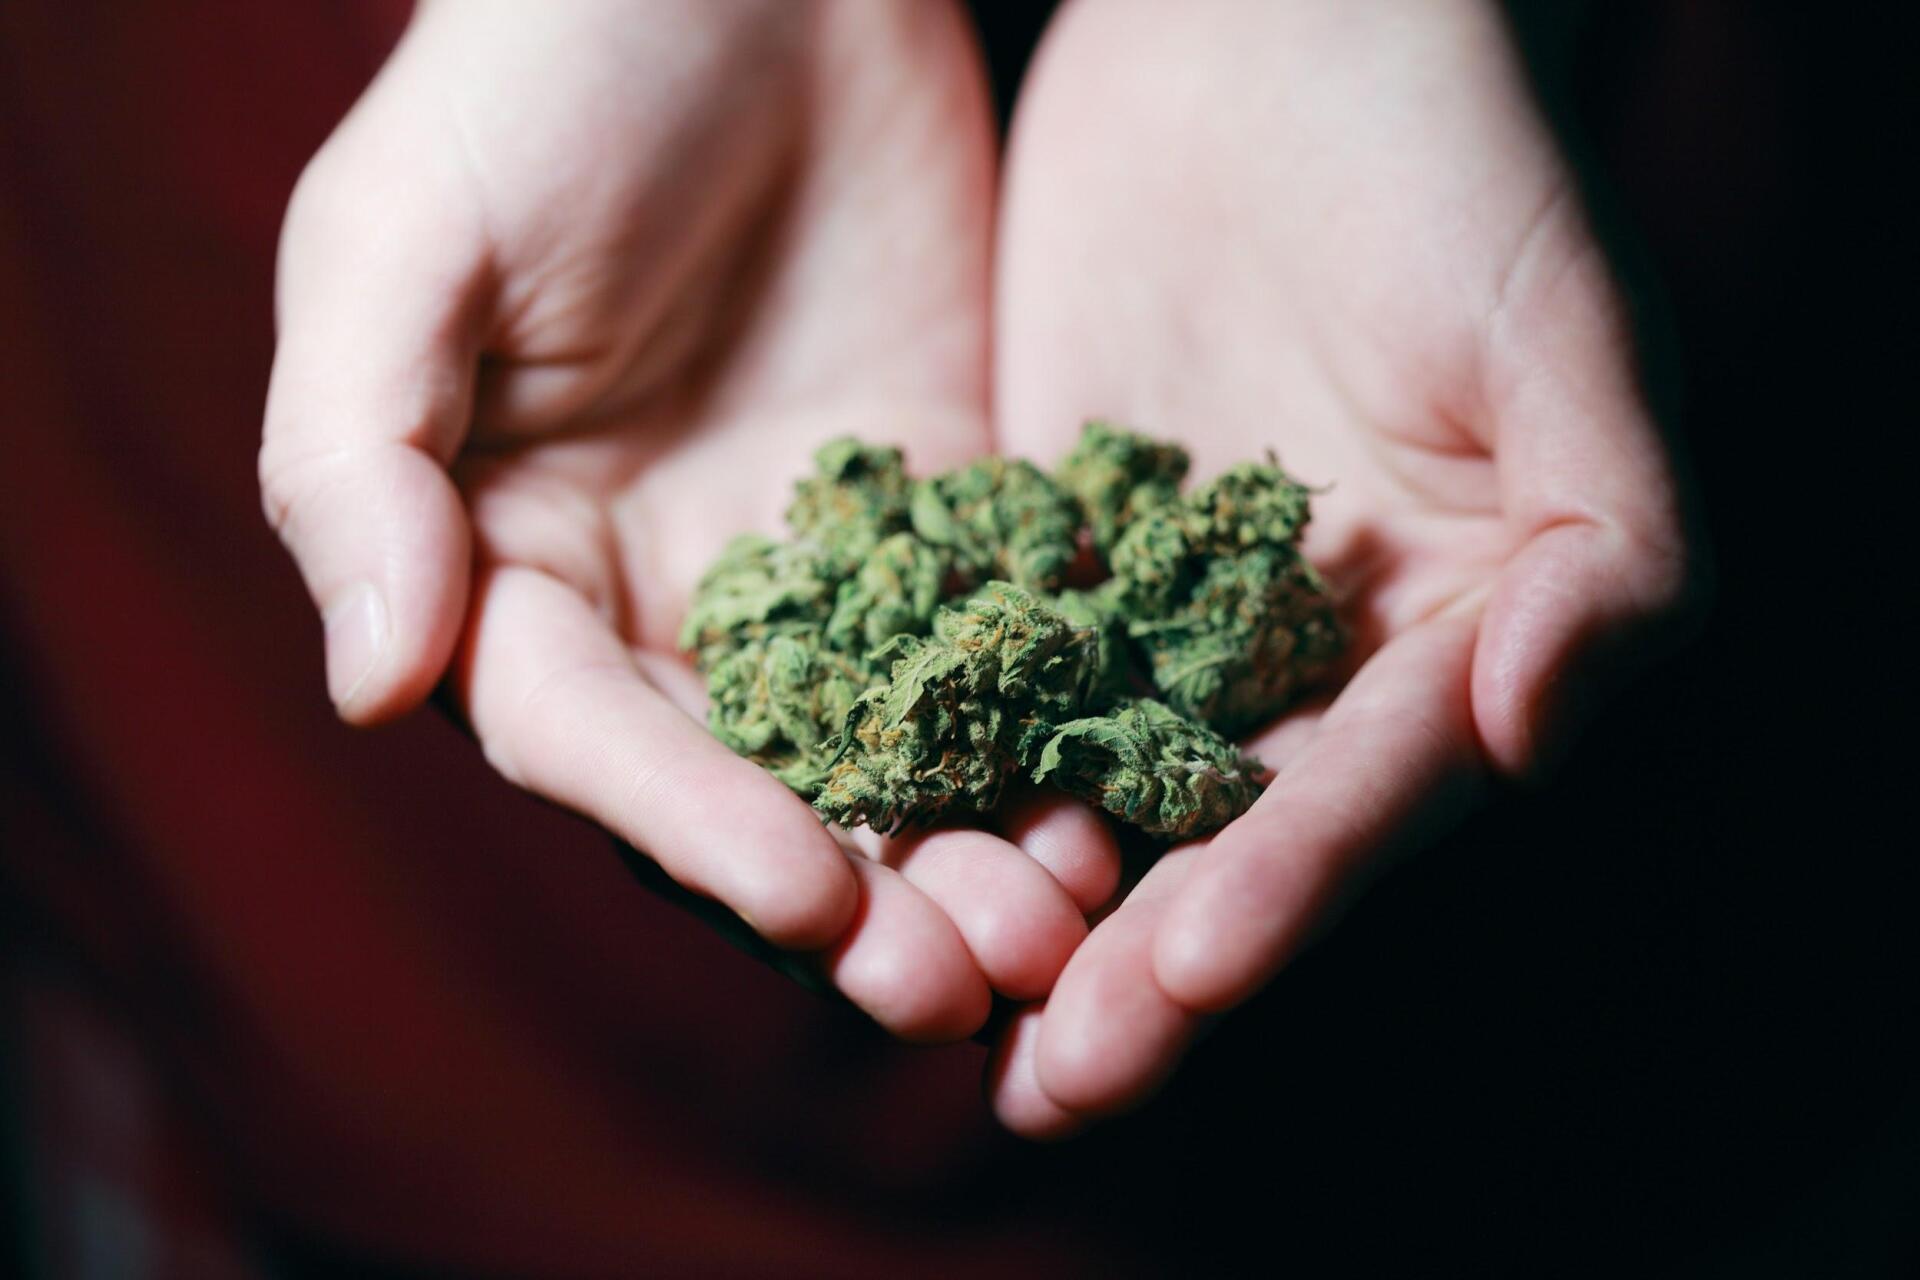 Person holding cannabis buds in their hands